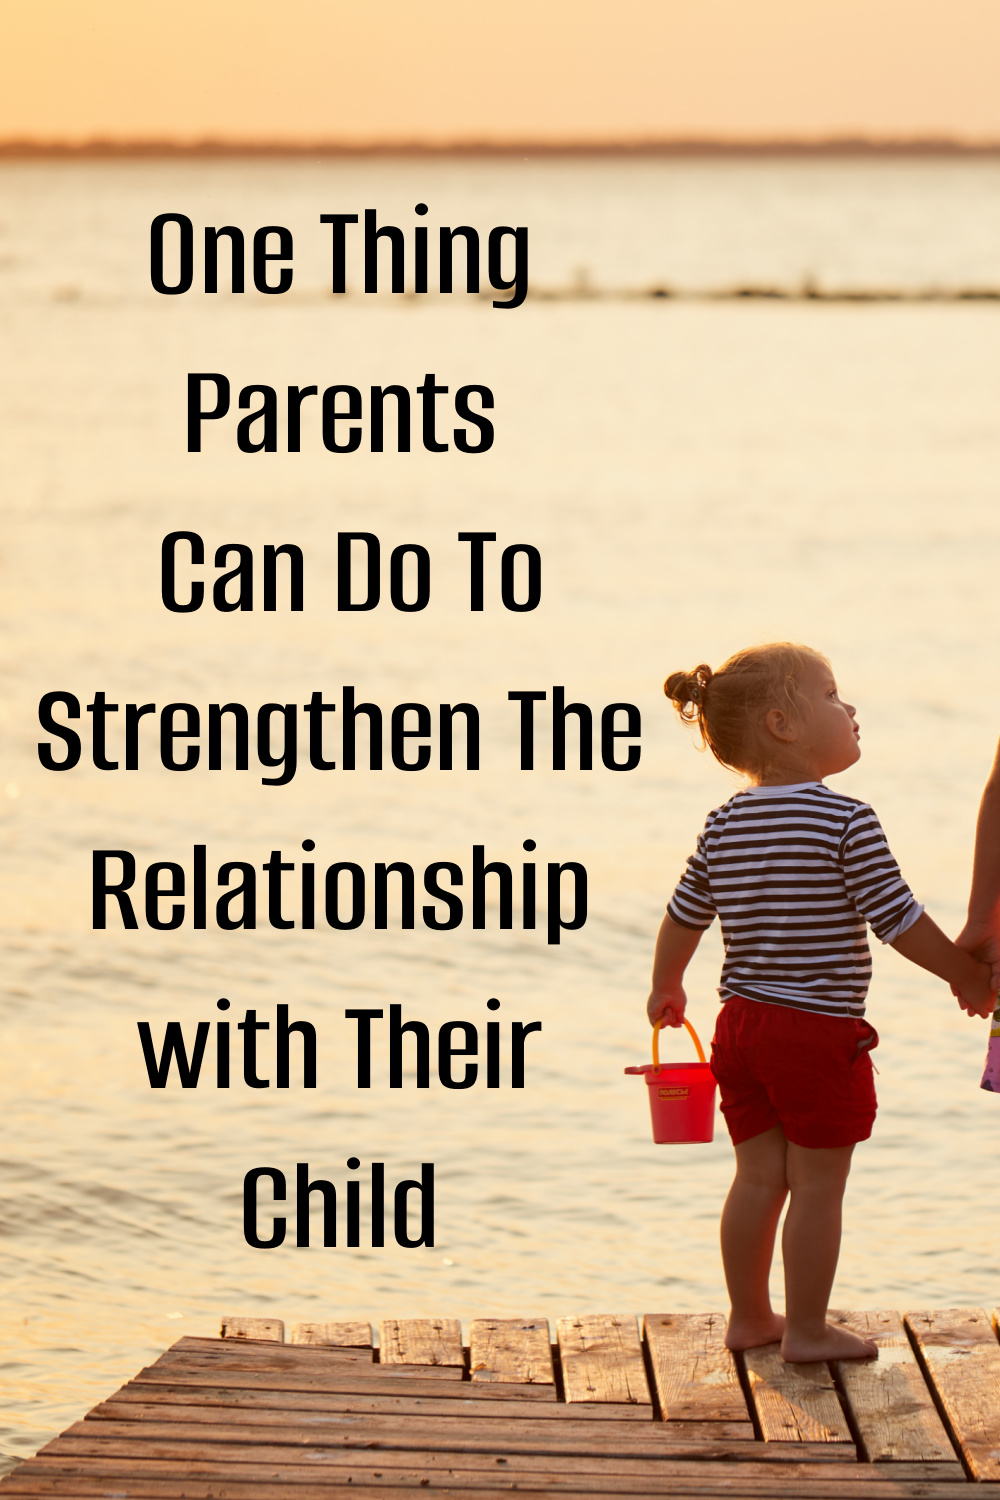 One Thing Parents Can Do To Strengthen The Relationship with Their Child